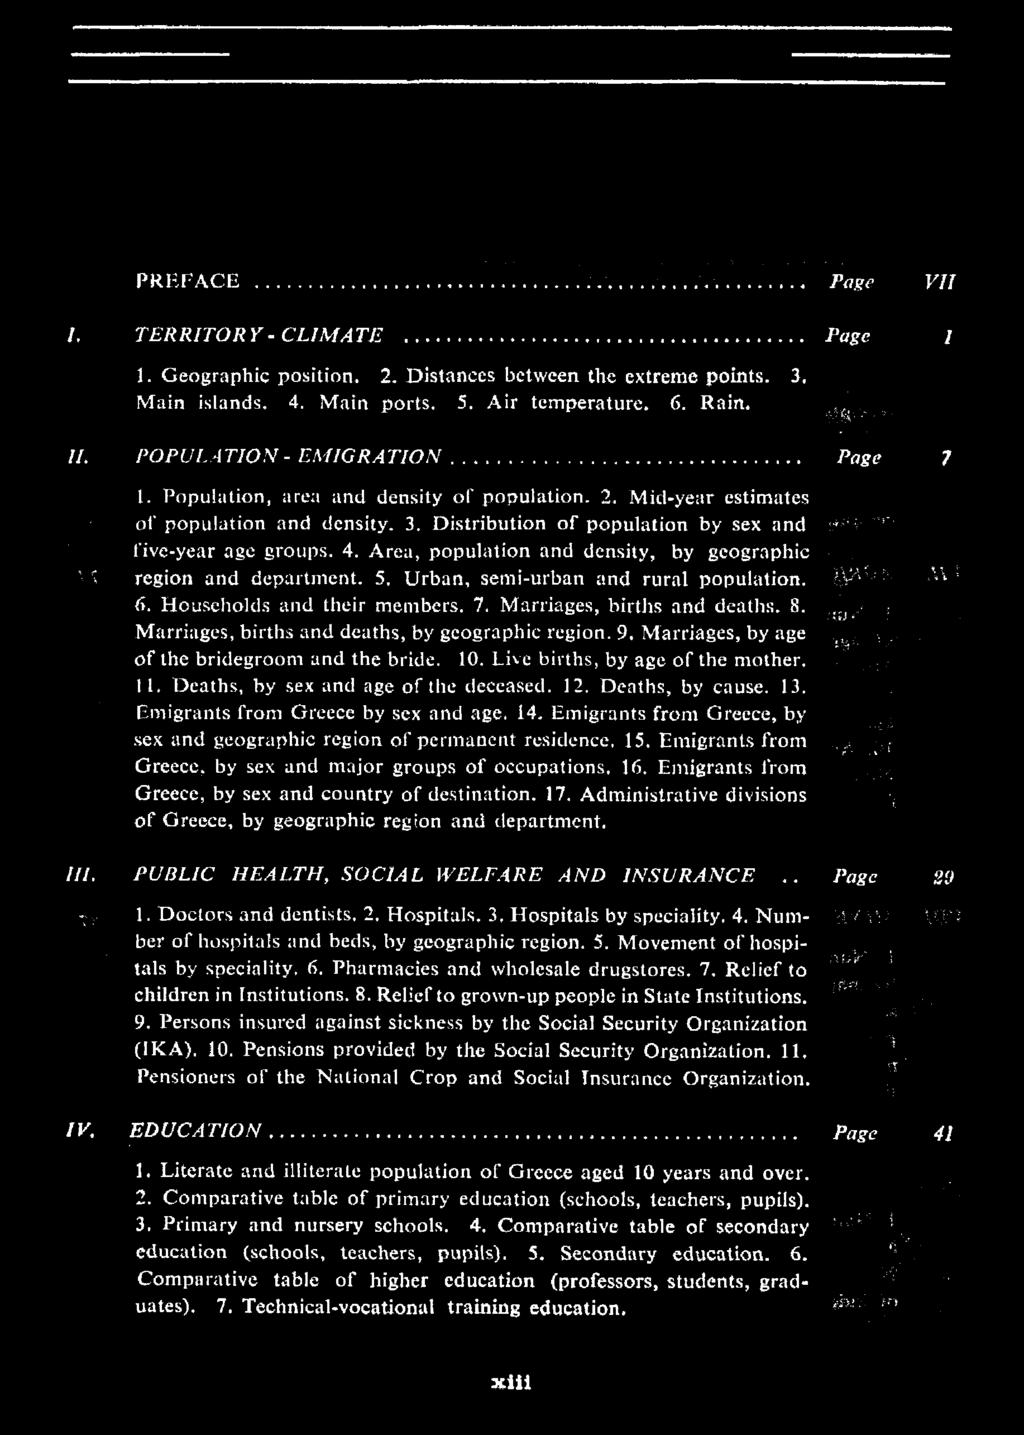 PREFACE Page VII I. TERRITORY - CLIMATE Page 1 1. Geographic position. 2. Distances between the extreme points. 3. Main islands. 4. Main ports. 5. Air temperature. 6. Rain. II.